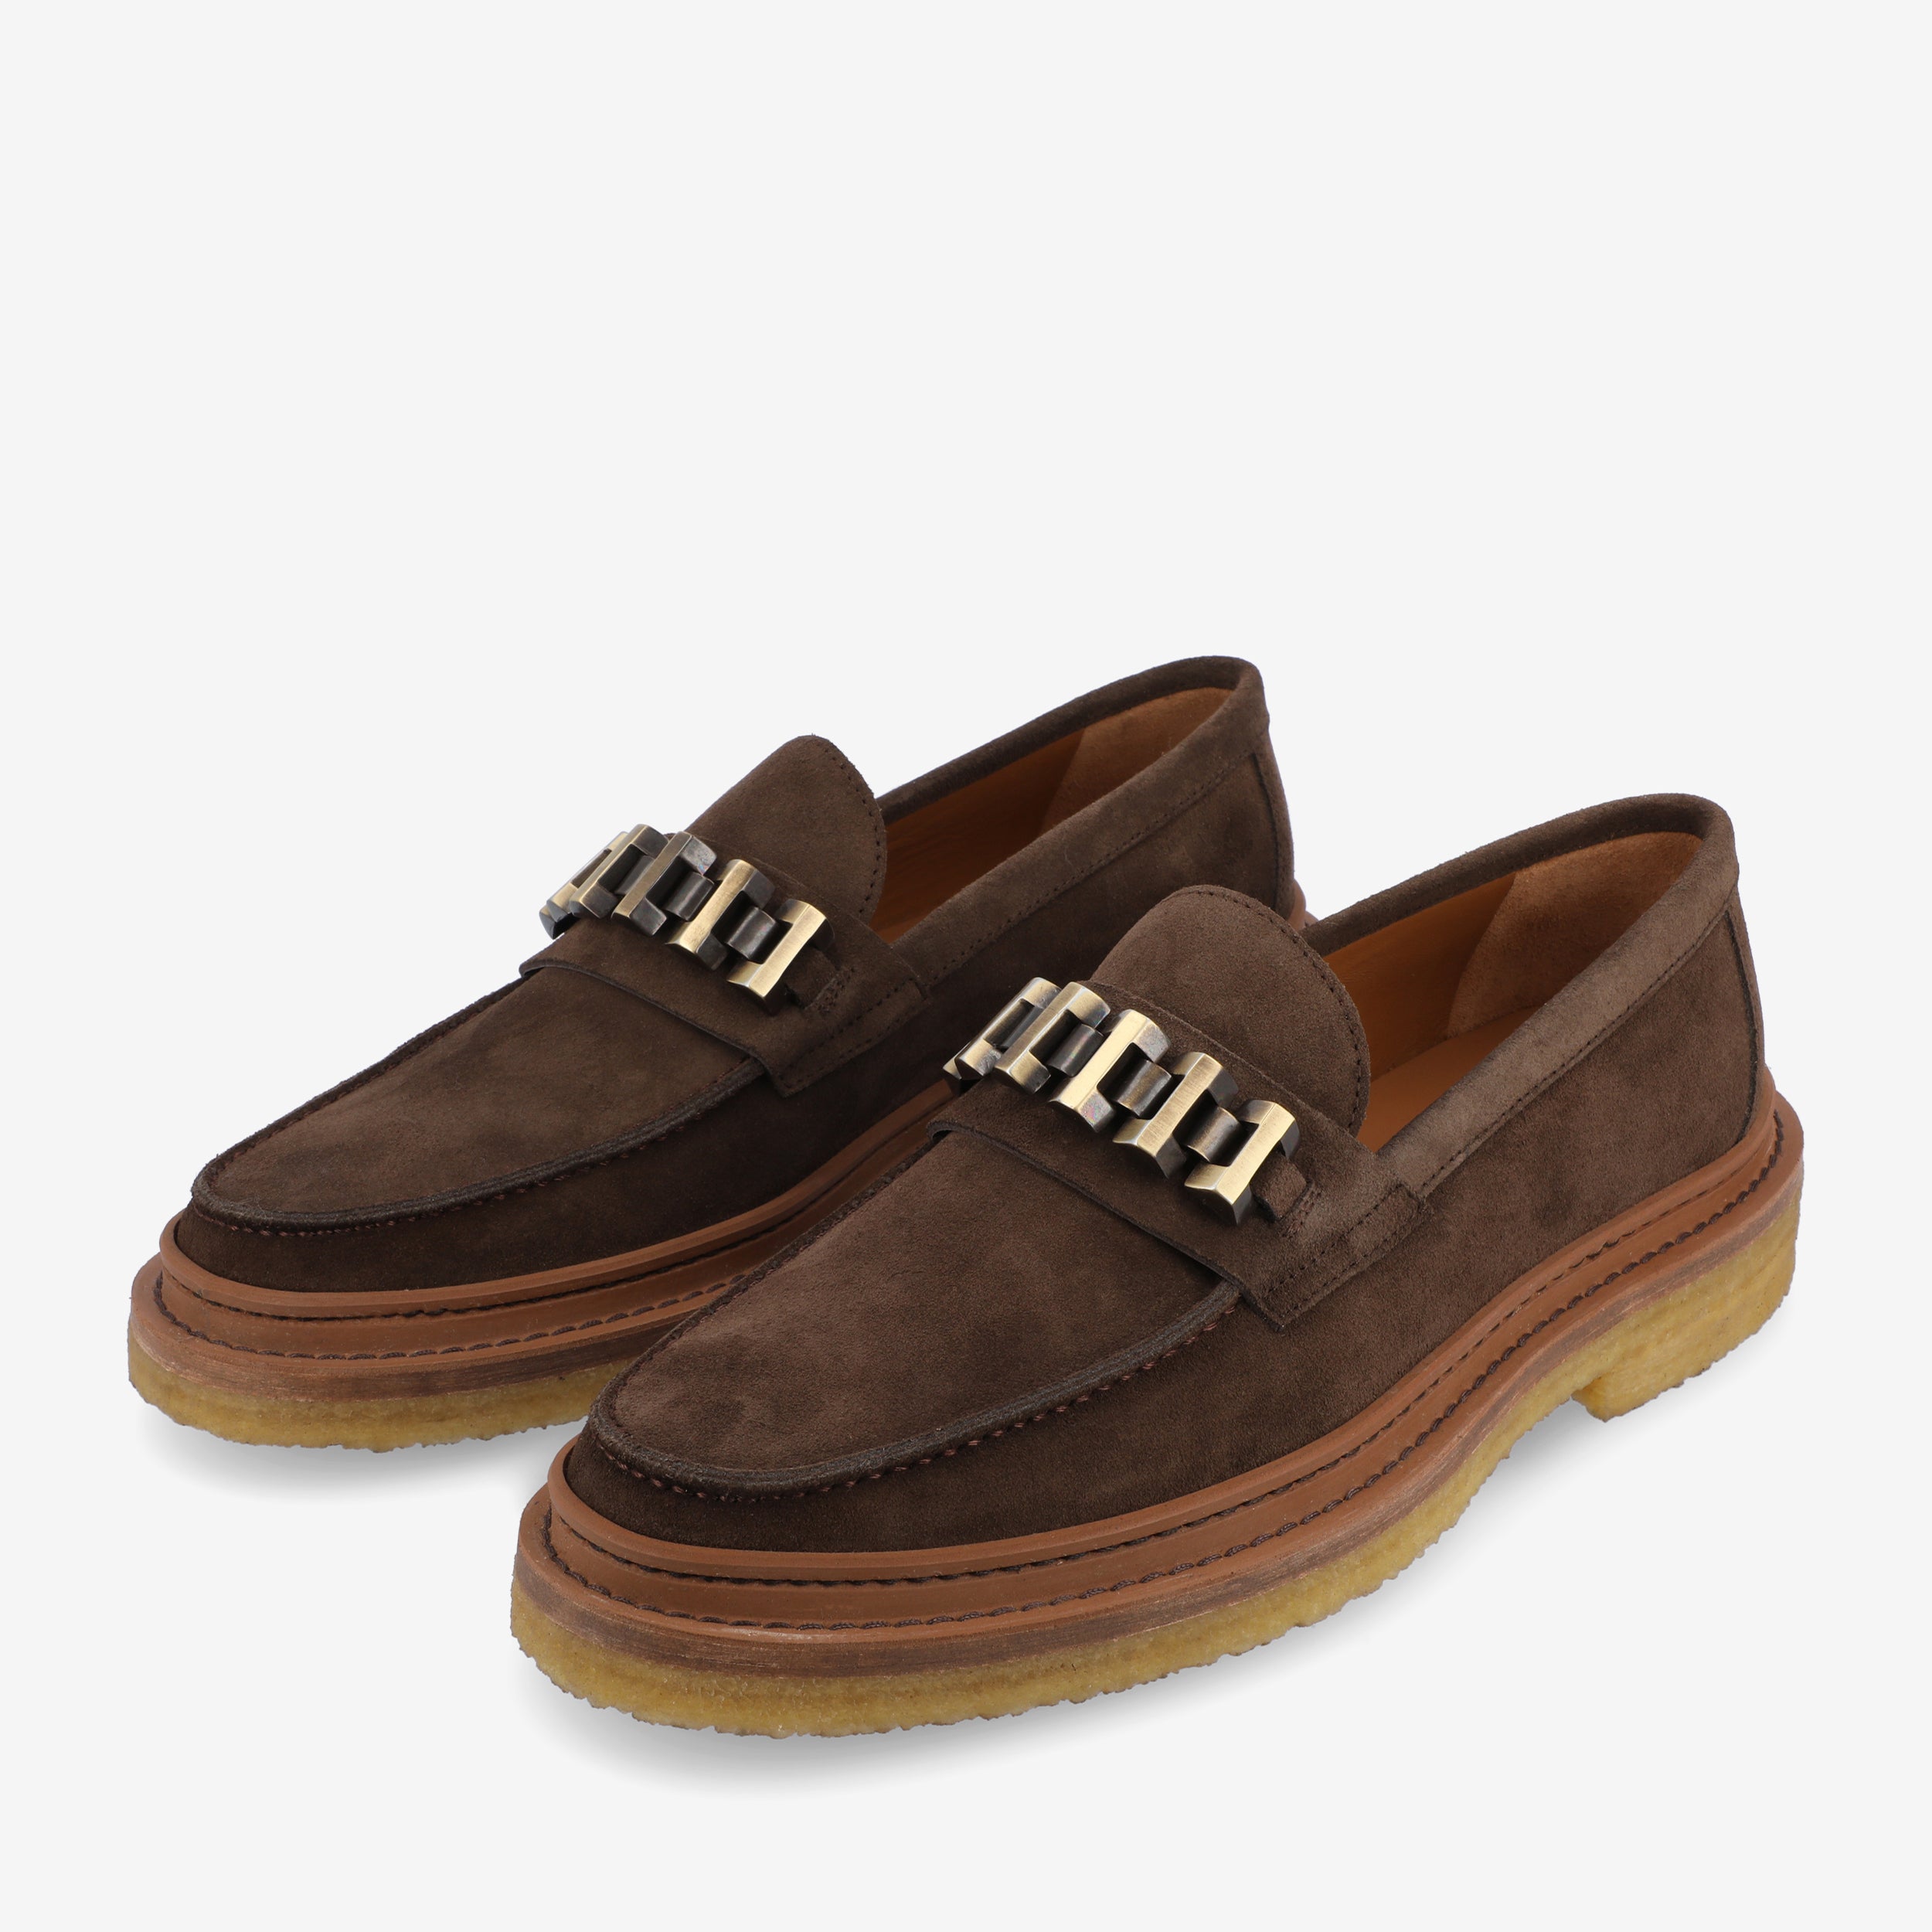 The Verona Loafer in Brown (Last Chance, Final Sale)